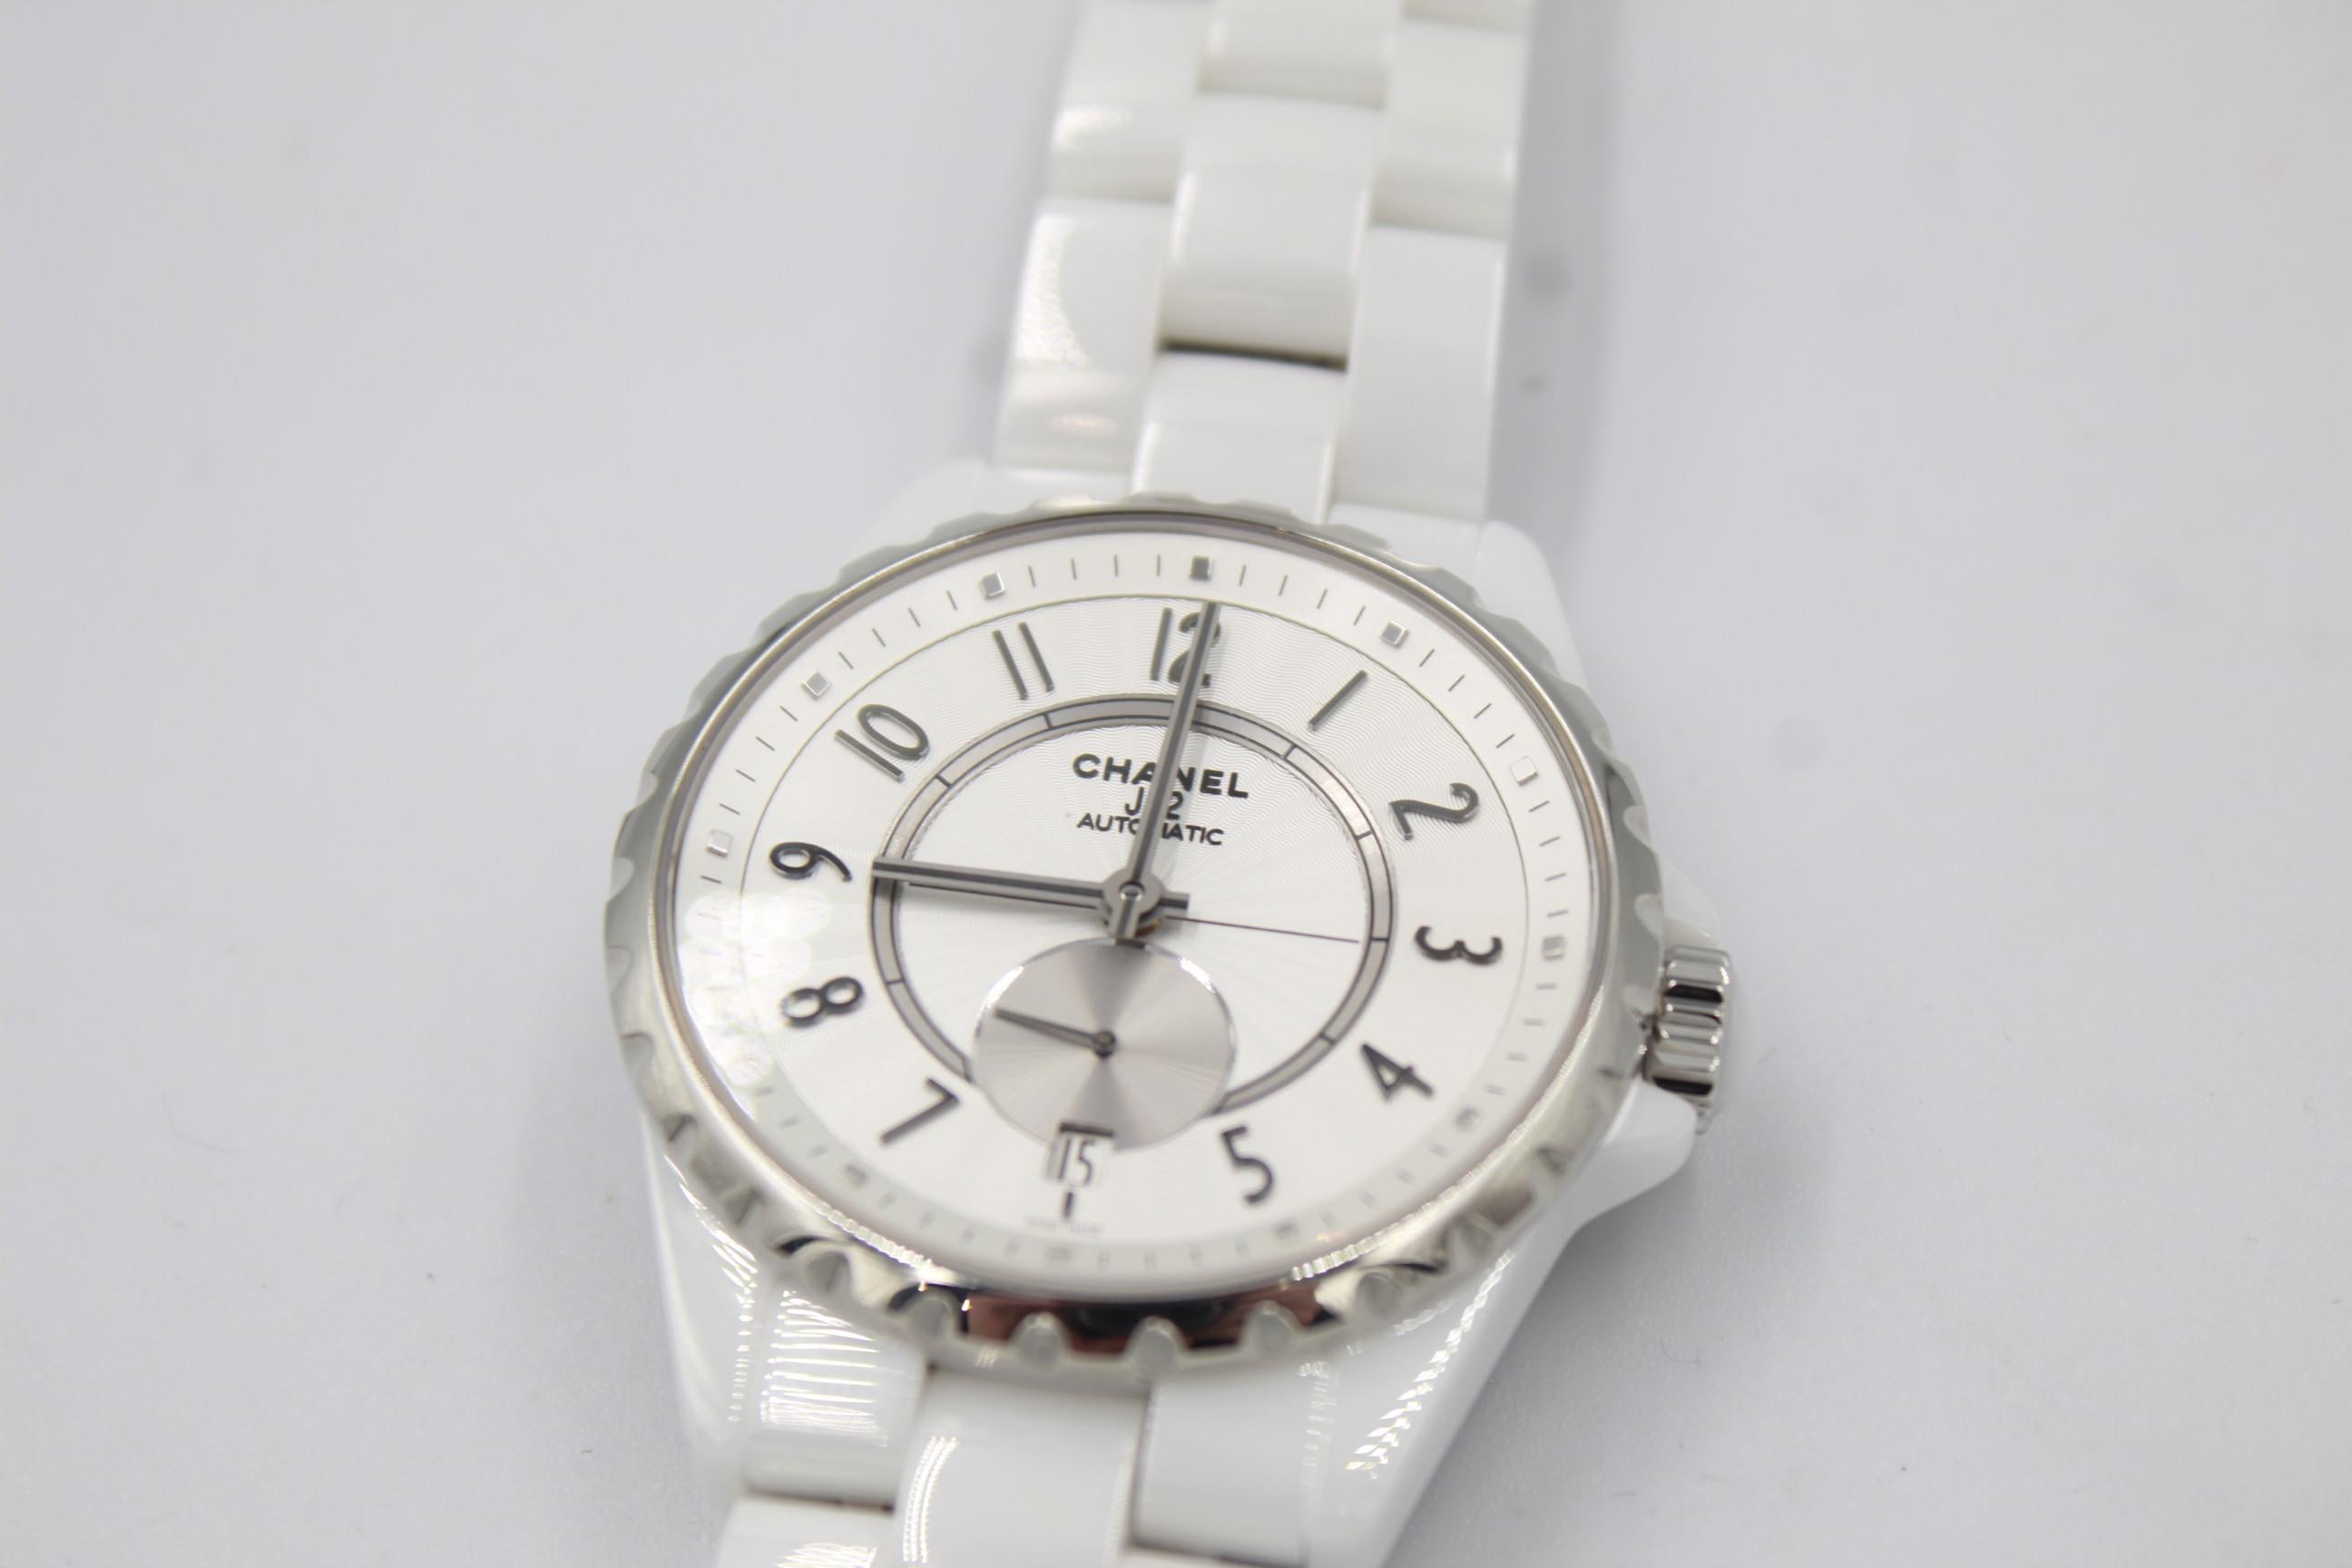 Chanel watch J12 in white ceramic.
Good condition, with some light signs of wear.
38mm
